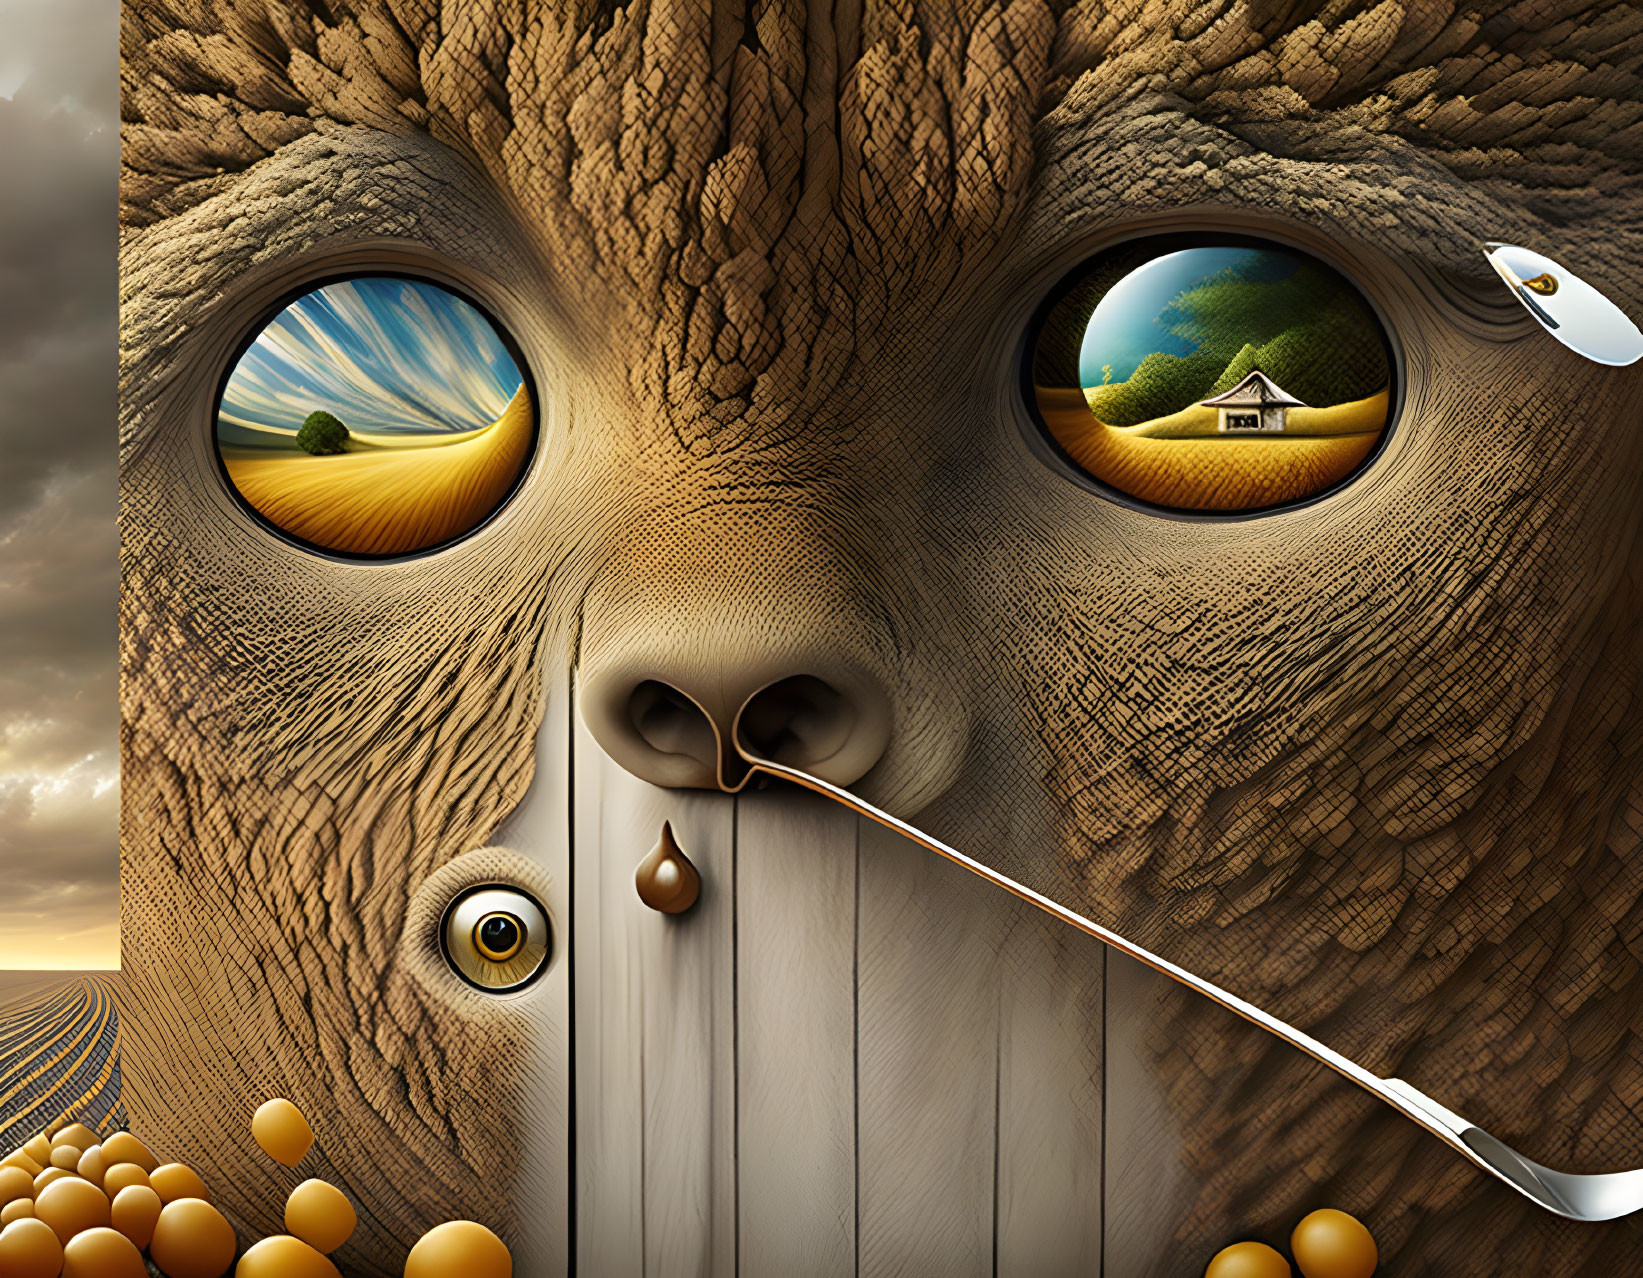 Surreal elephant art with expressive eyes and zipper scene